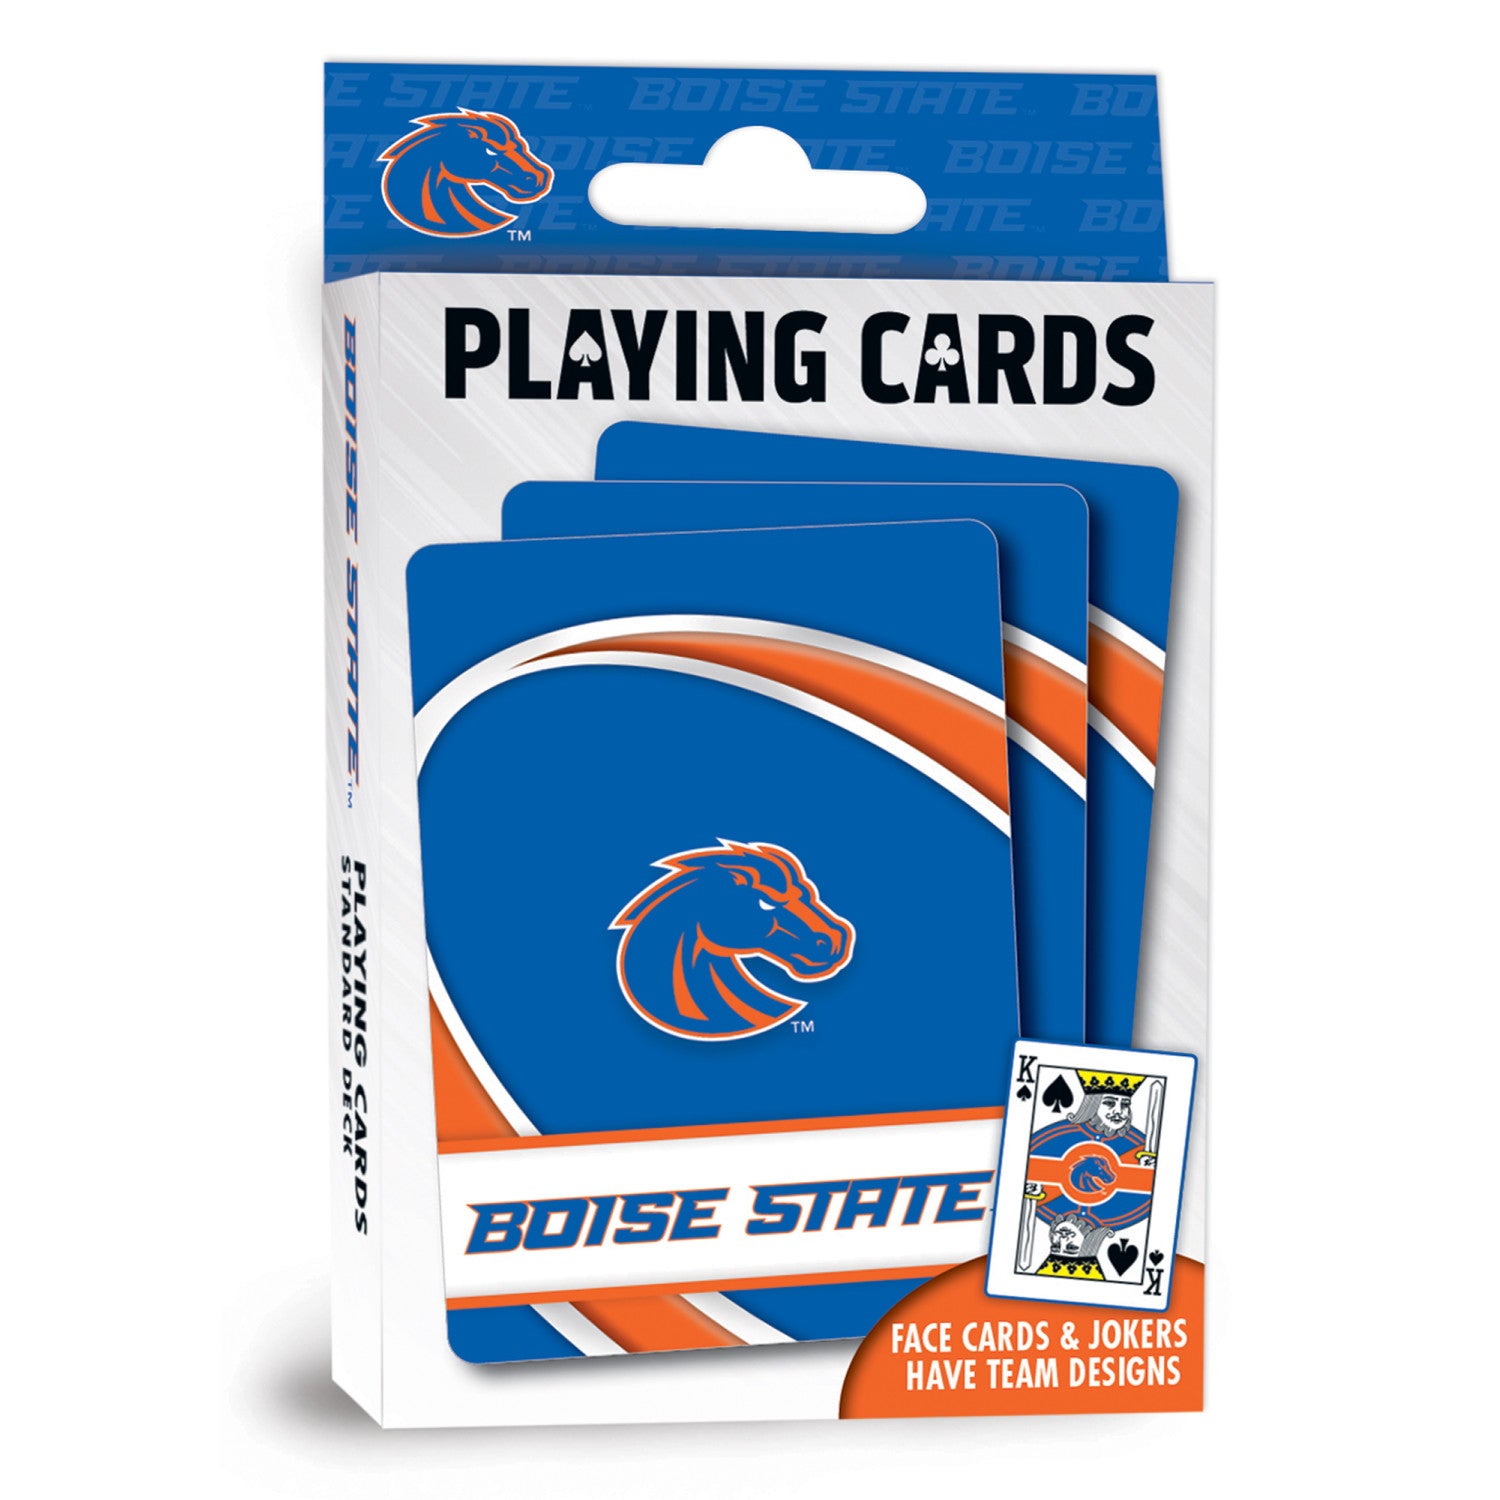 Boise State Broncos Playing Cards - 54 Card Deck